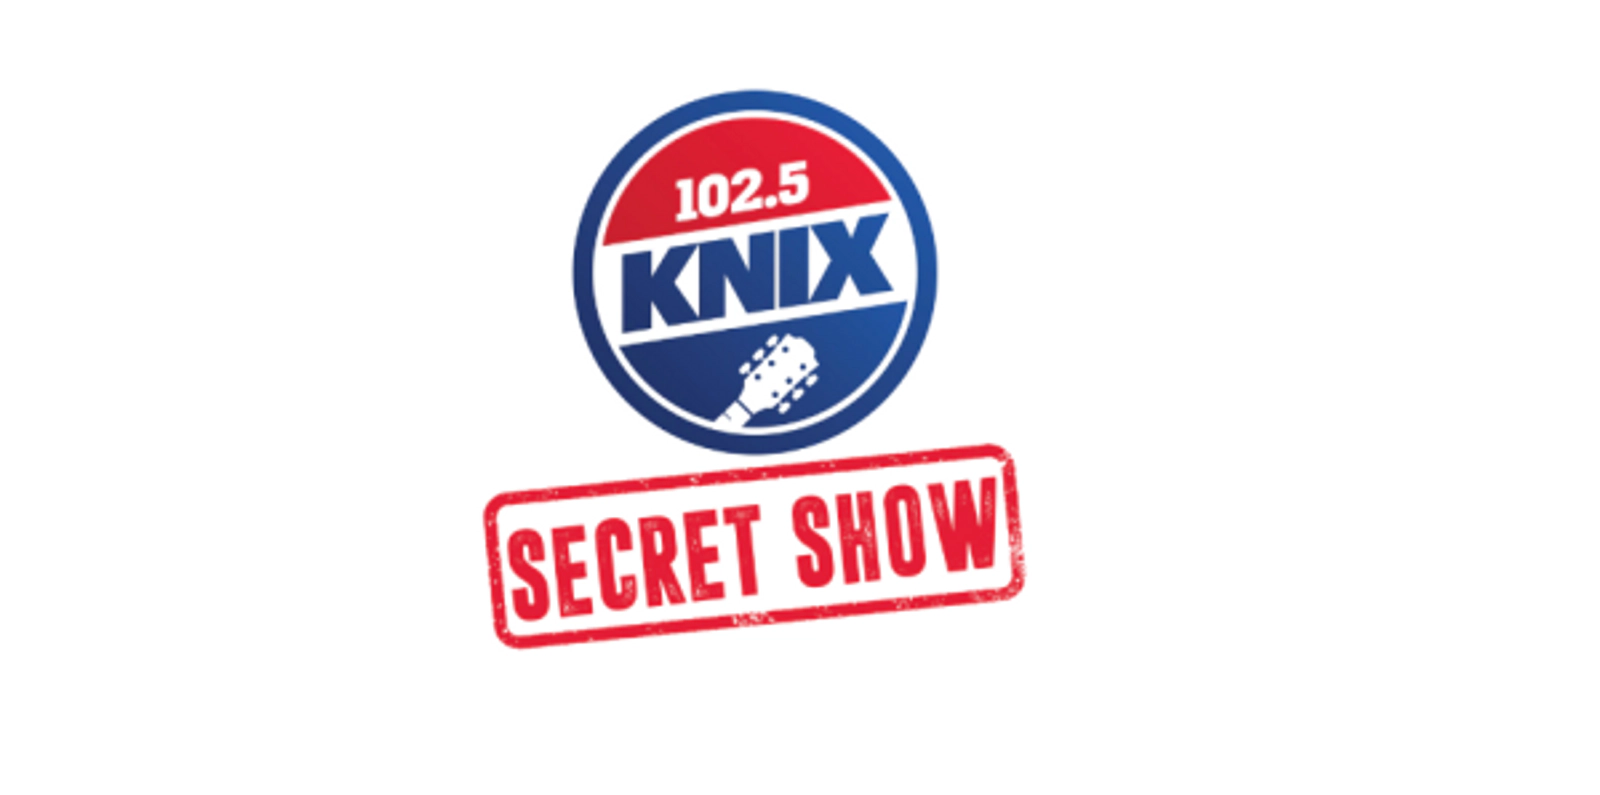 KNIX Country 102.5 - The #KNIXSecretShow is back! 🙌 See you in